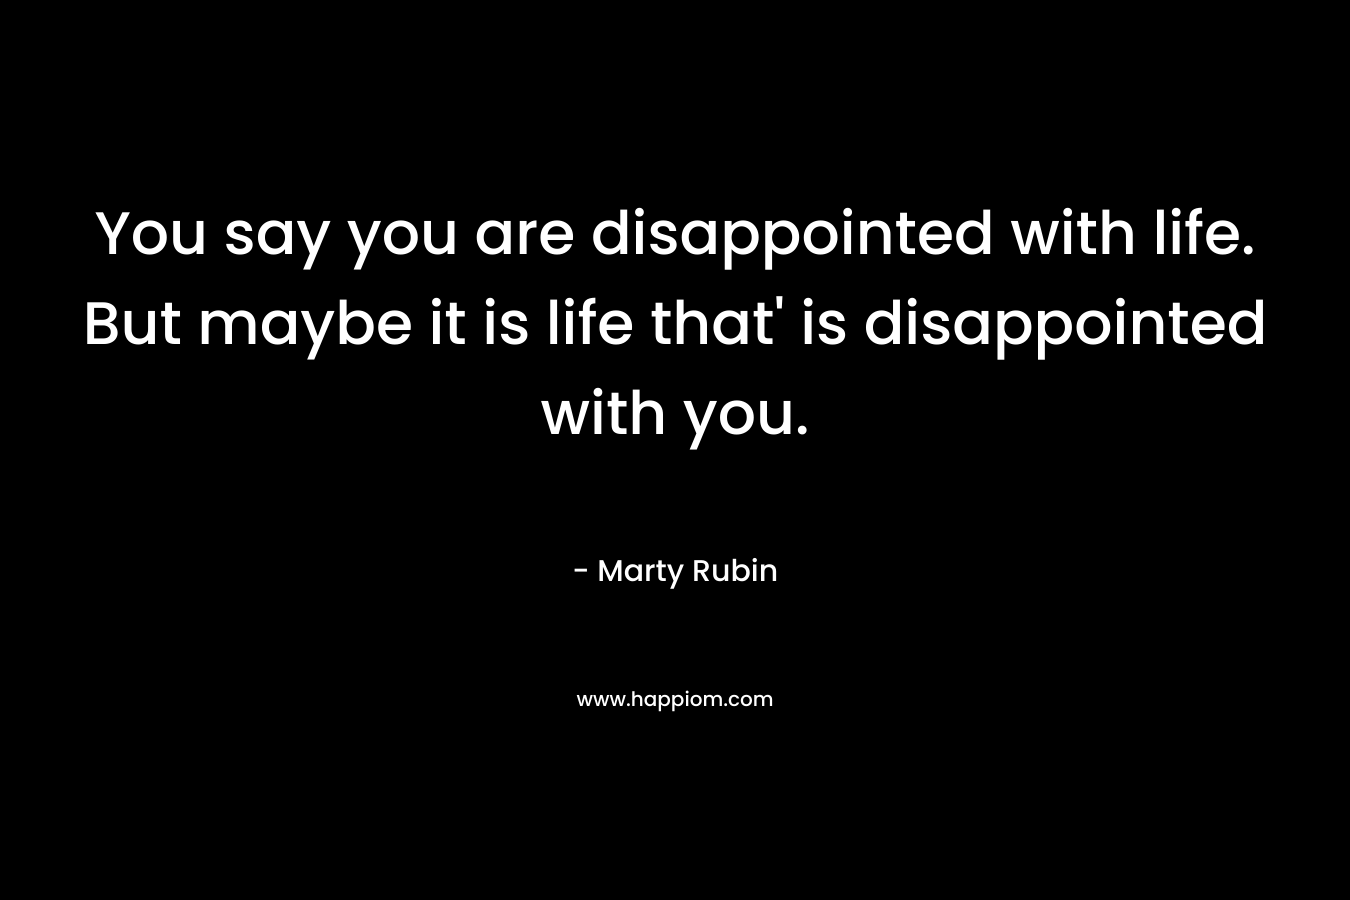 You say you are disappointed with life. But maybe it is life that’ is disappointed with you. – Marty Rubin